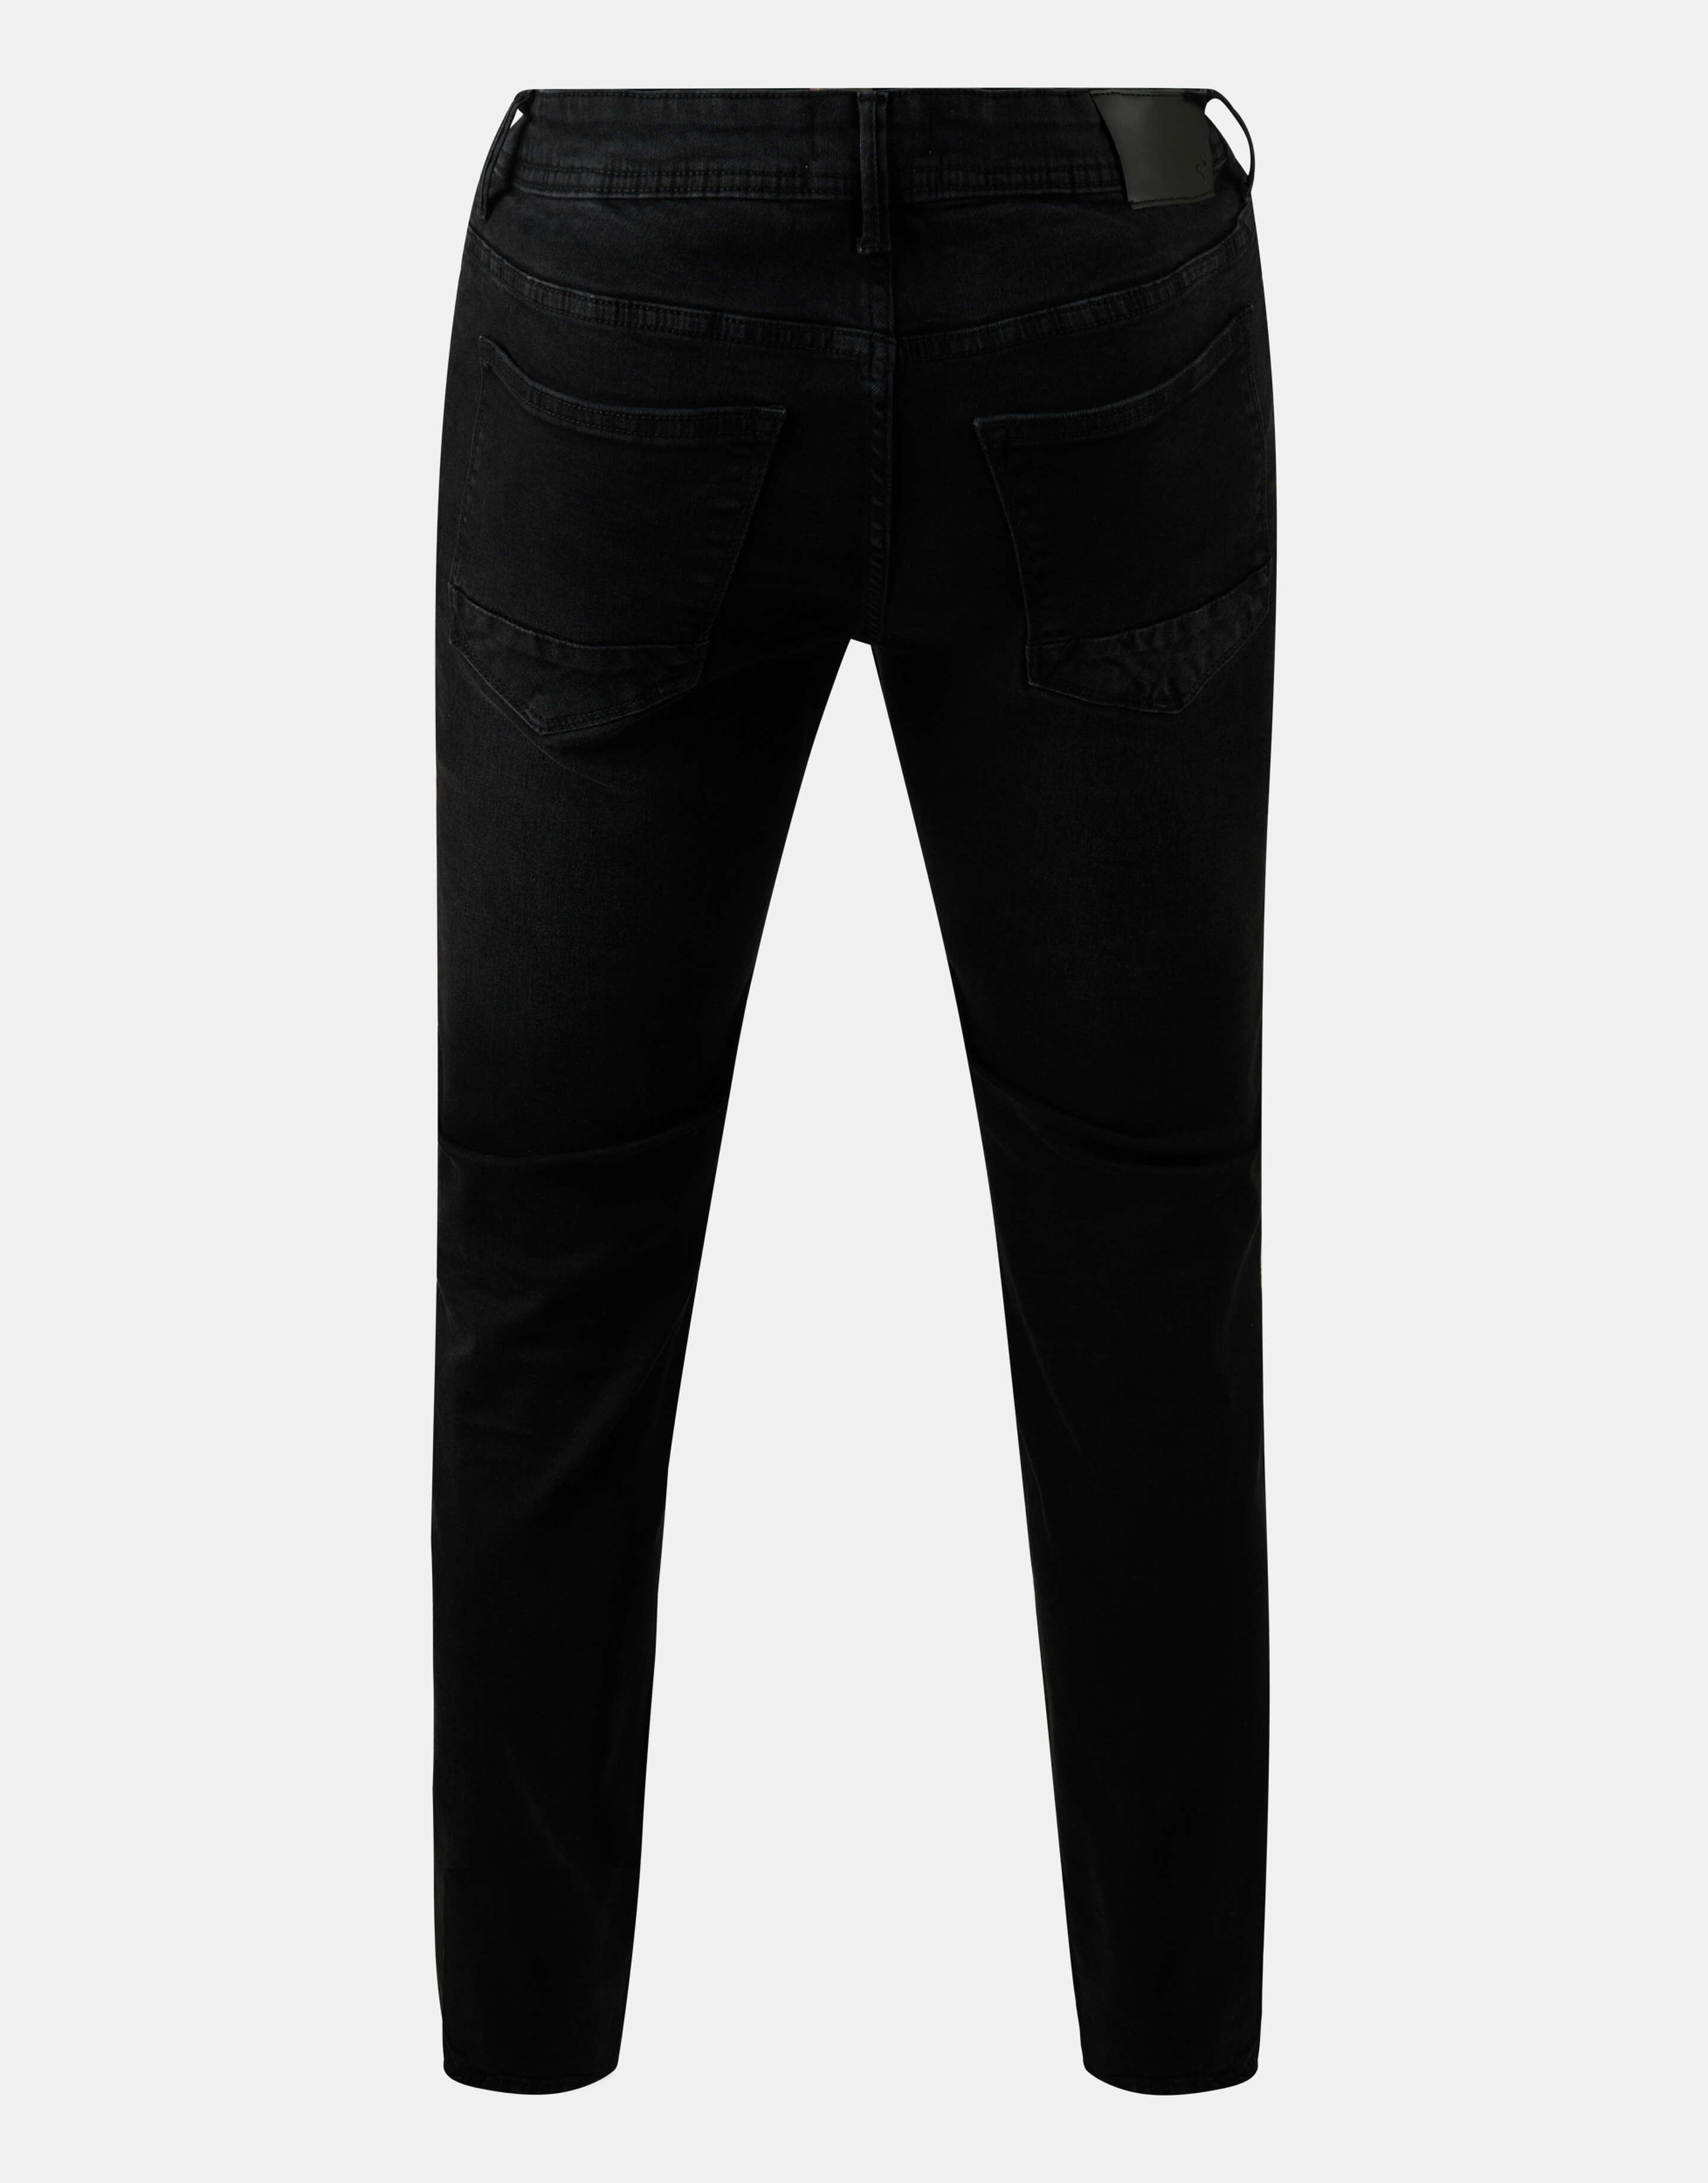 Straight Jeans Washed Black L32 Refill